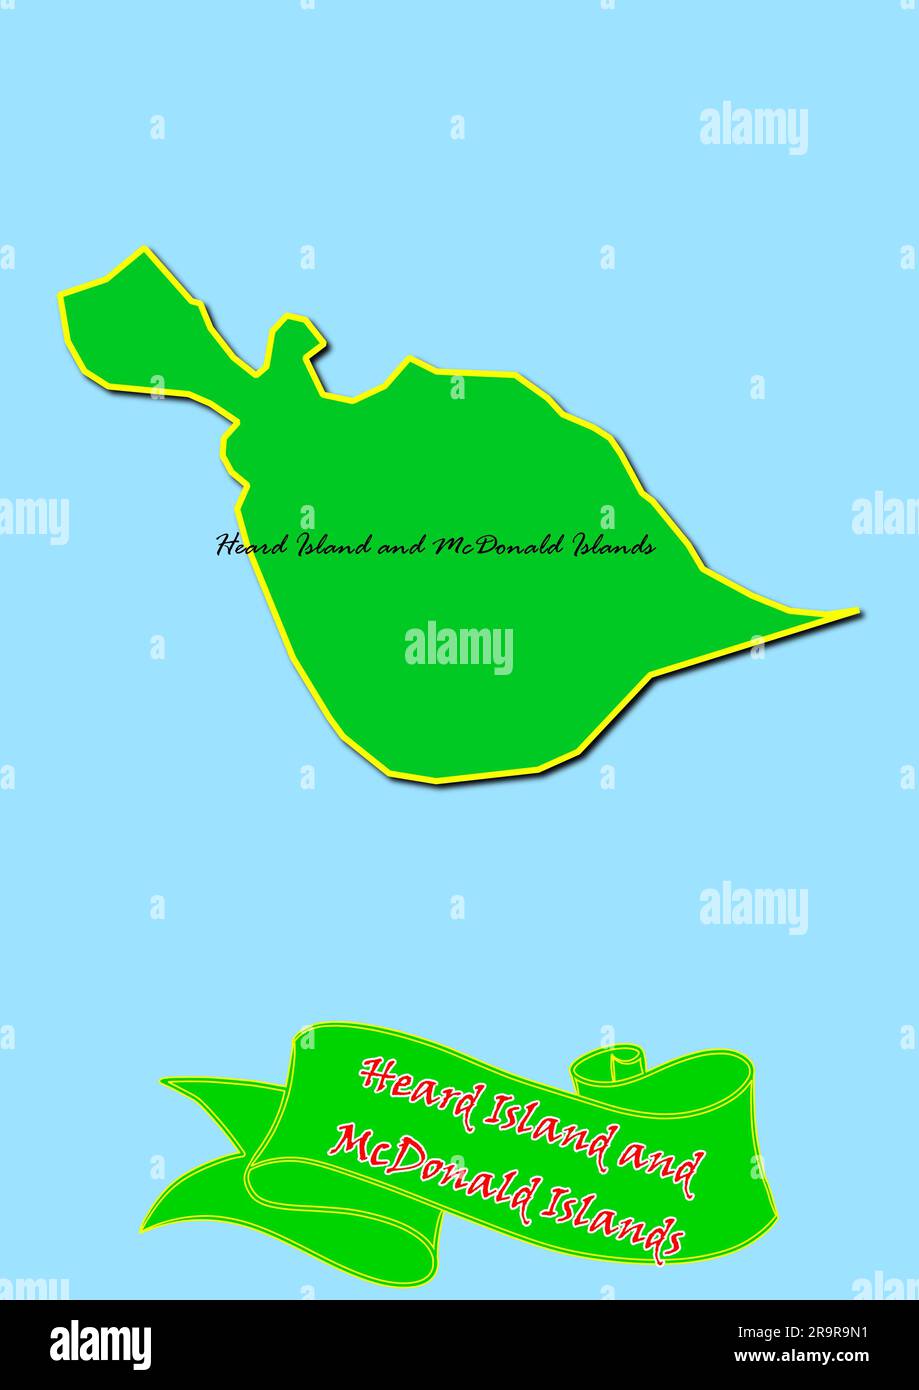 Map of Heard Island and McDonald Islands with Subregions in Green Country Name in Red Stock Photo